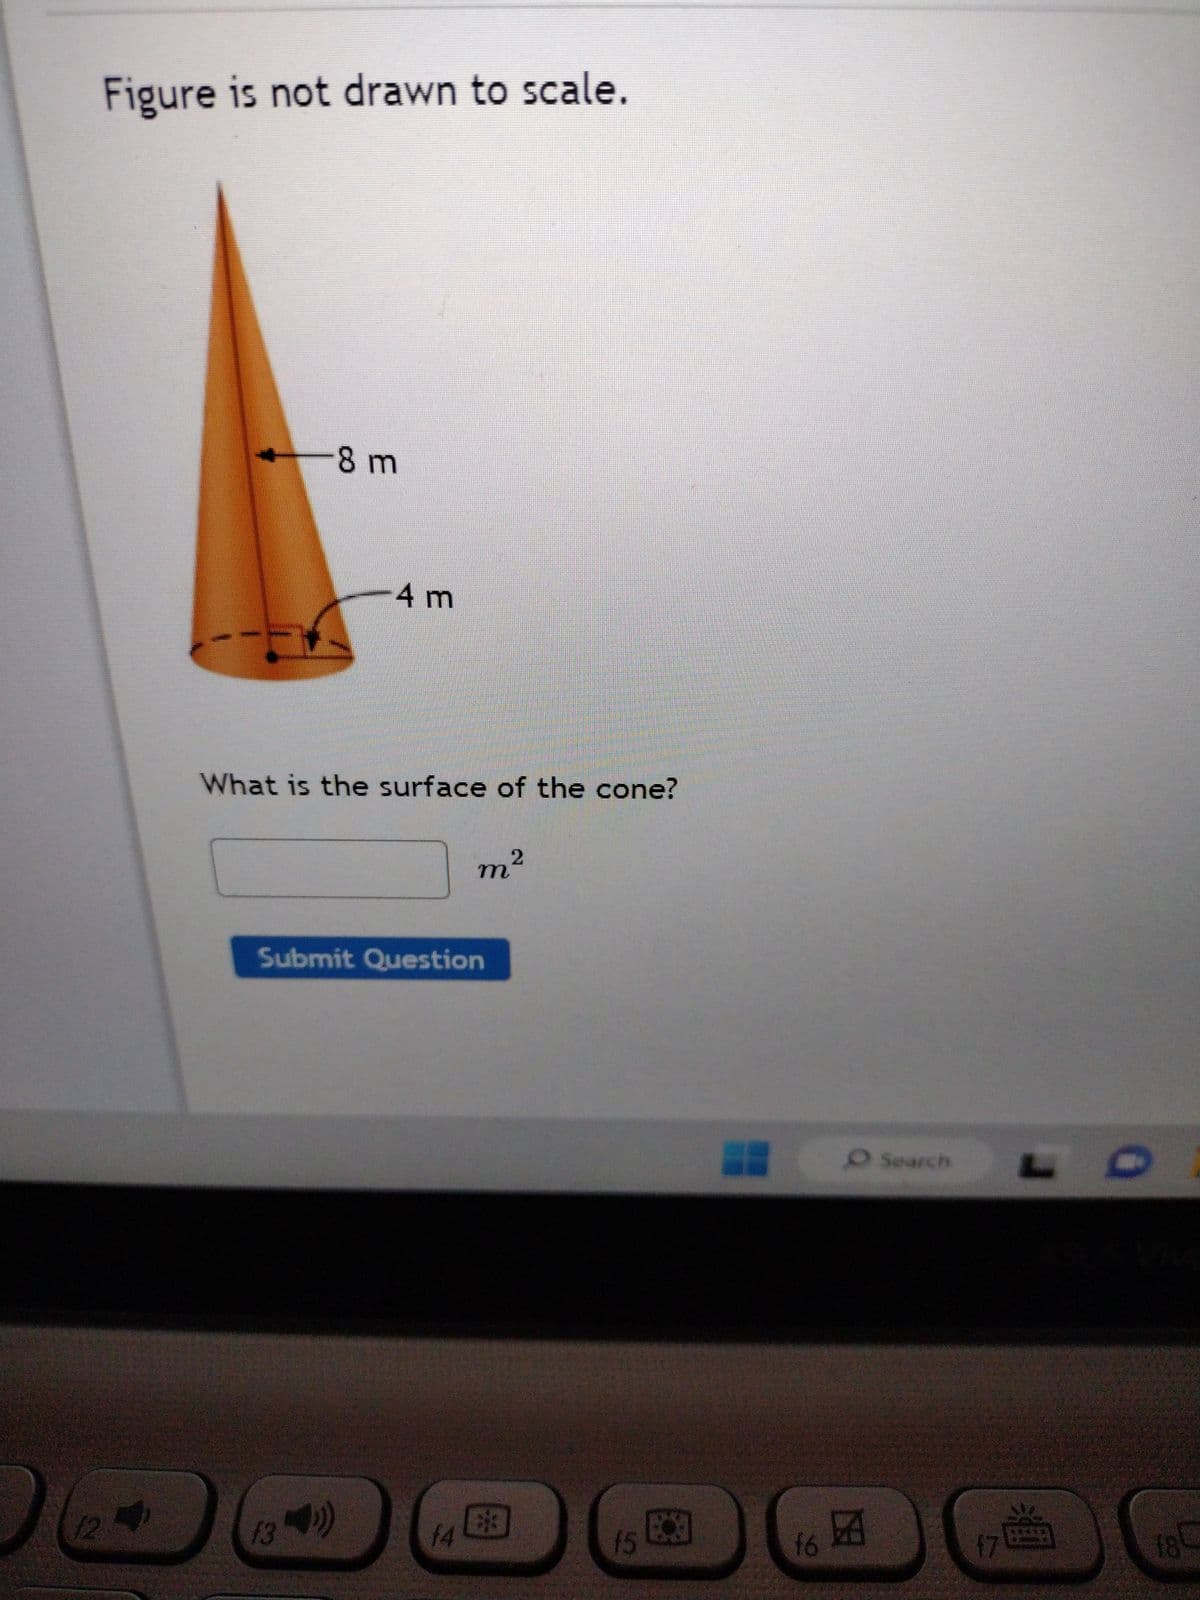 12
Figure is not drawn to scale.
-8 m
4 m
What is the surface of the cone?
f3
Submit Question
2
m²
f4
33
15
C
f6
O Search
因
17
18